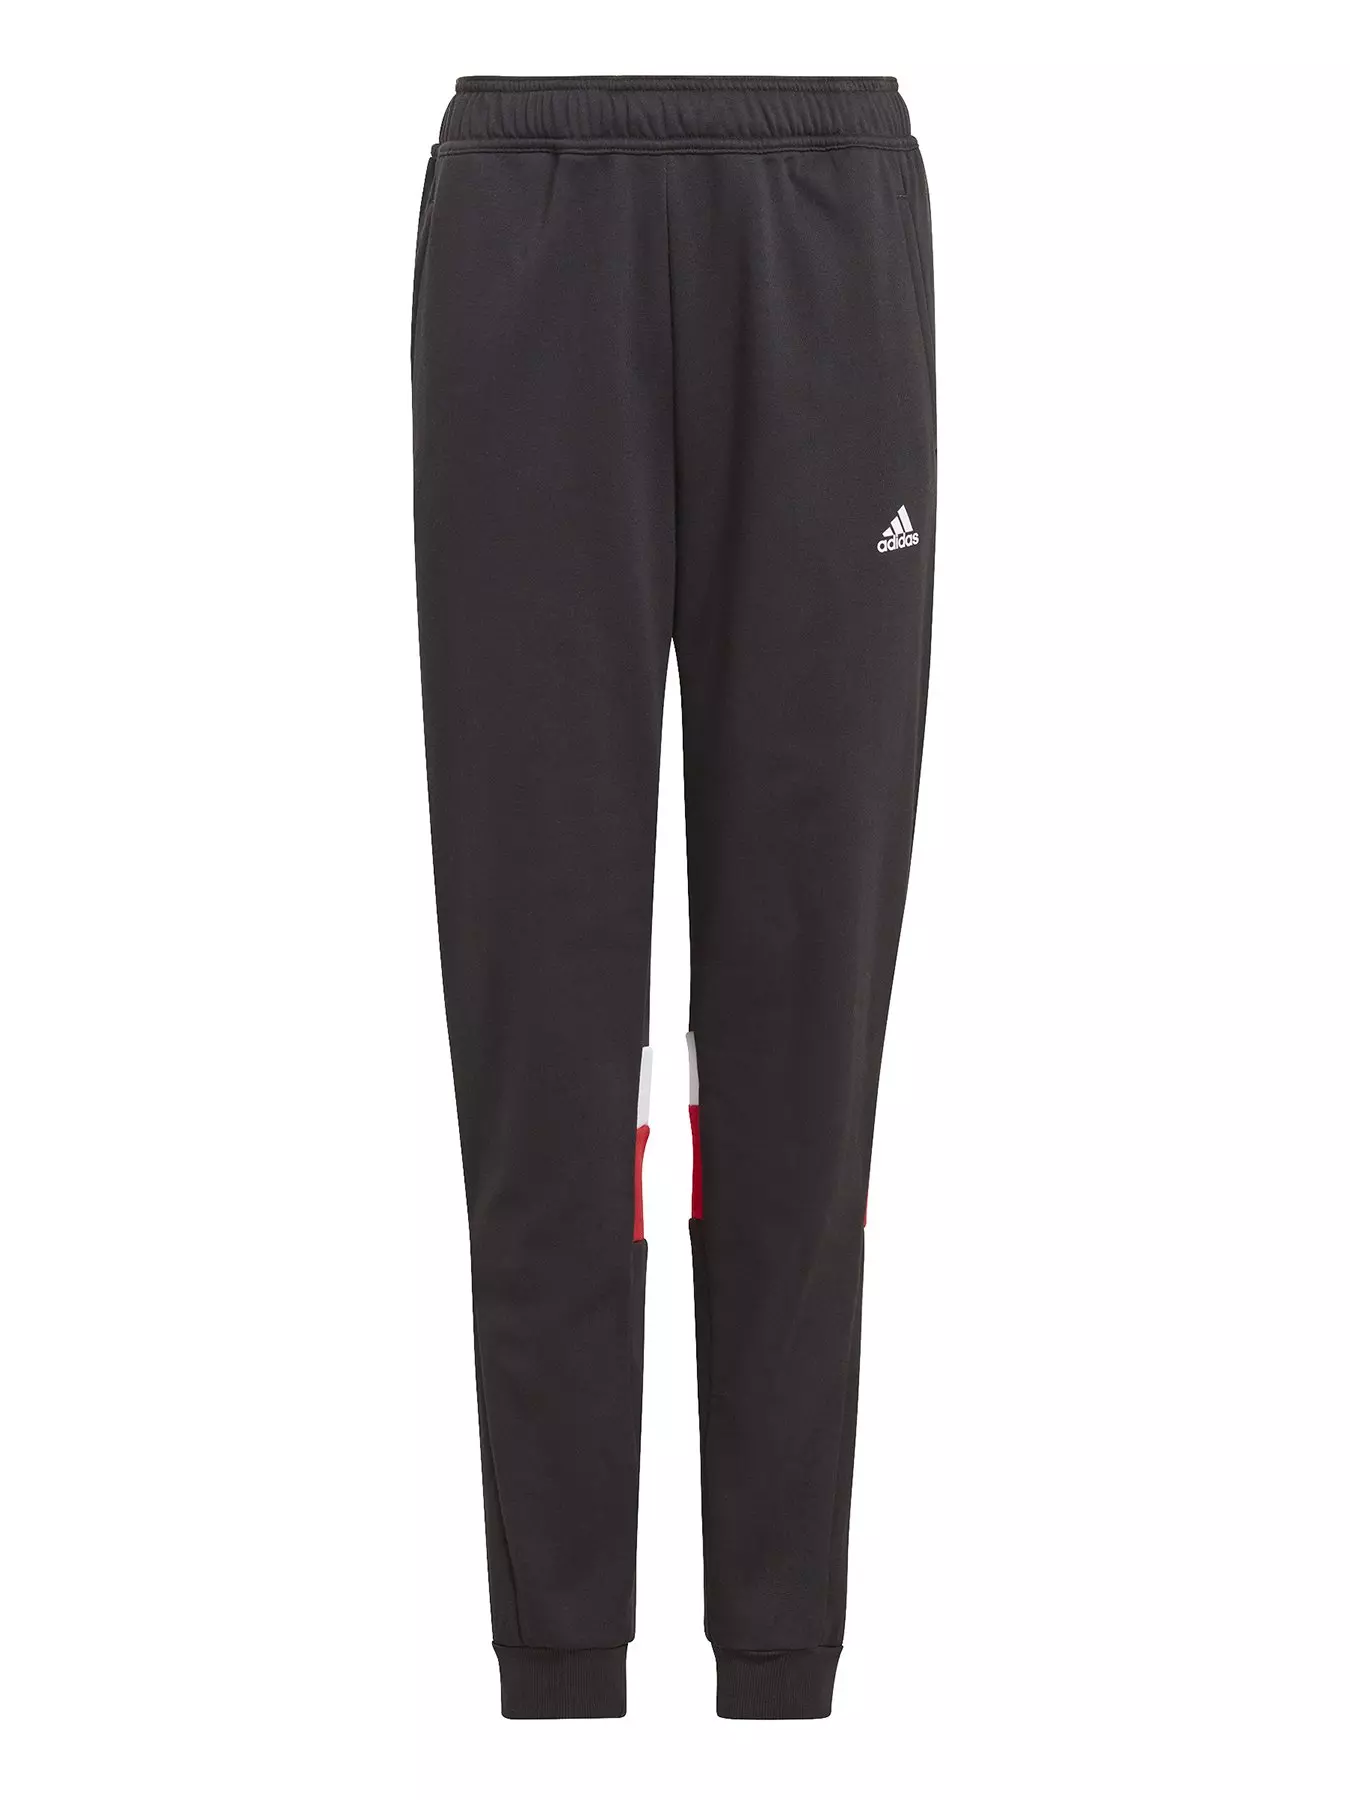 Adidas Girls Tricot Jogger Pants -COLOR: Black/Hot Pink Size: 2T